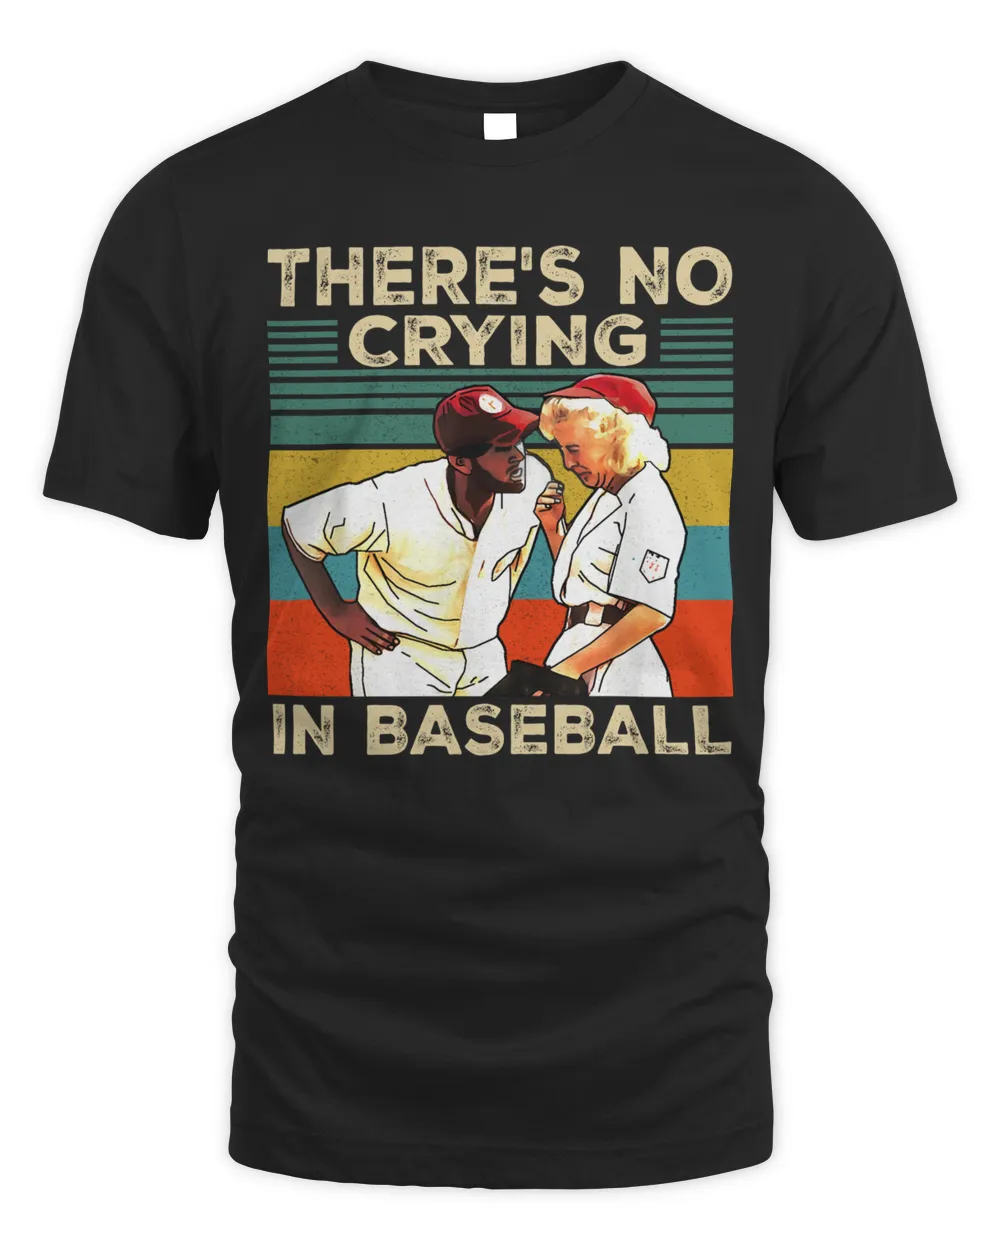 There's no crying in baseball tee